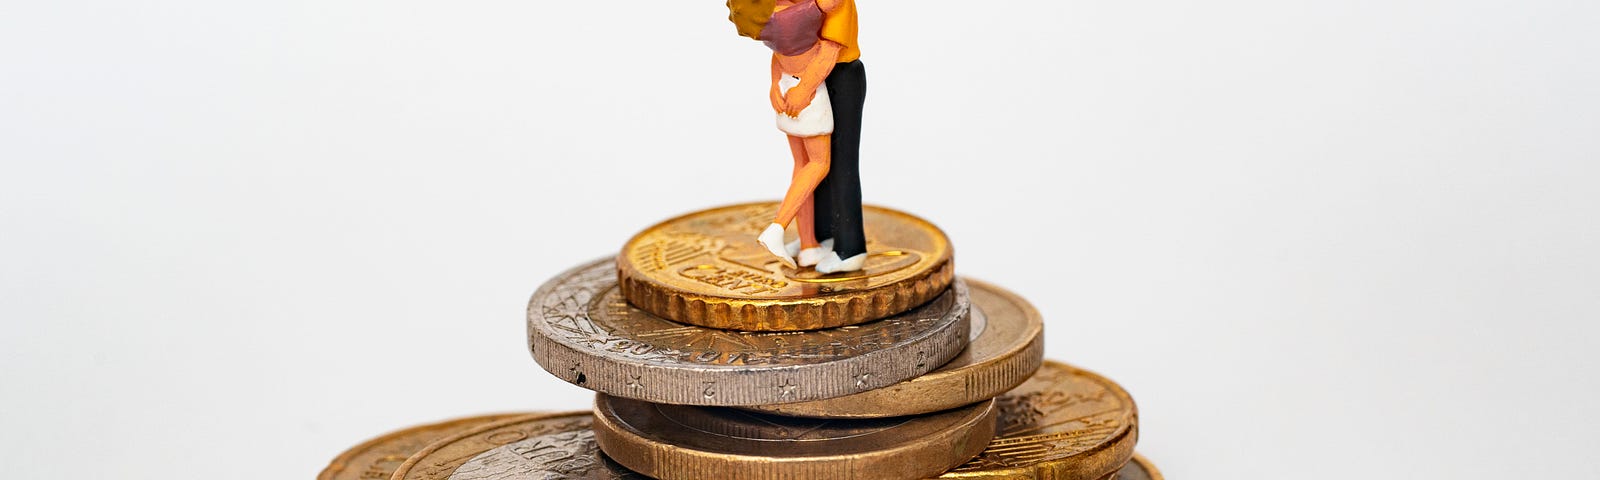 man and woman kissing on top of gold coins